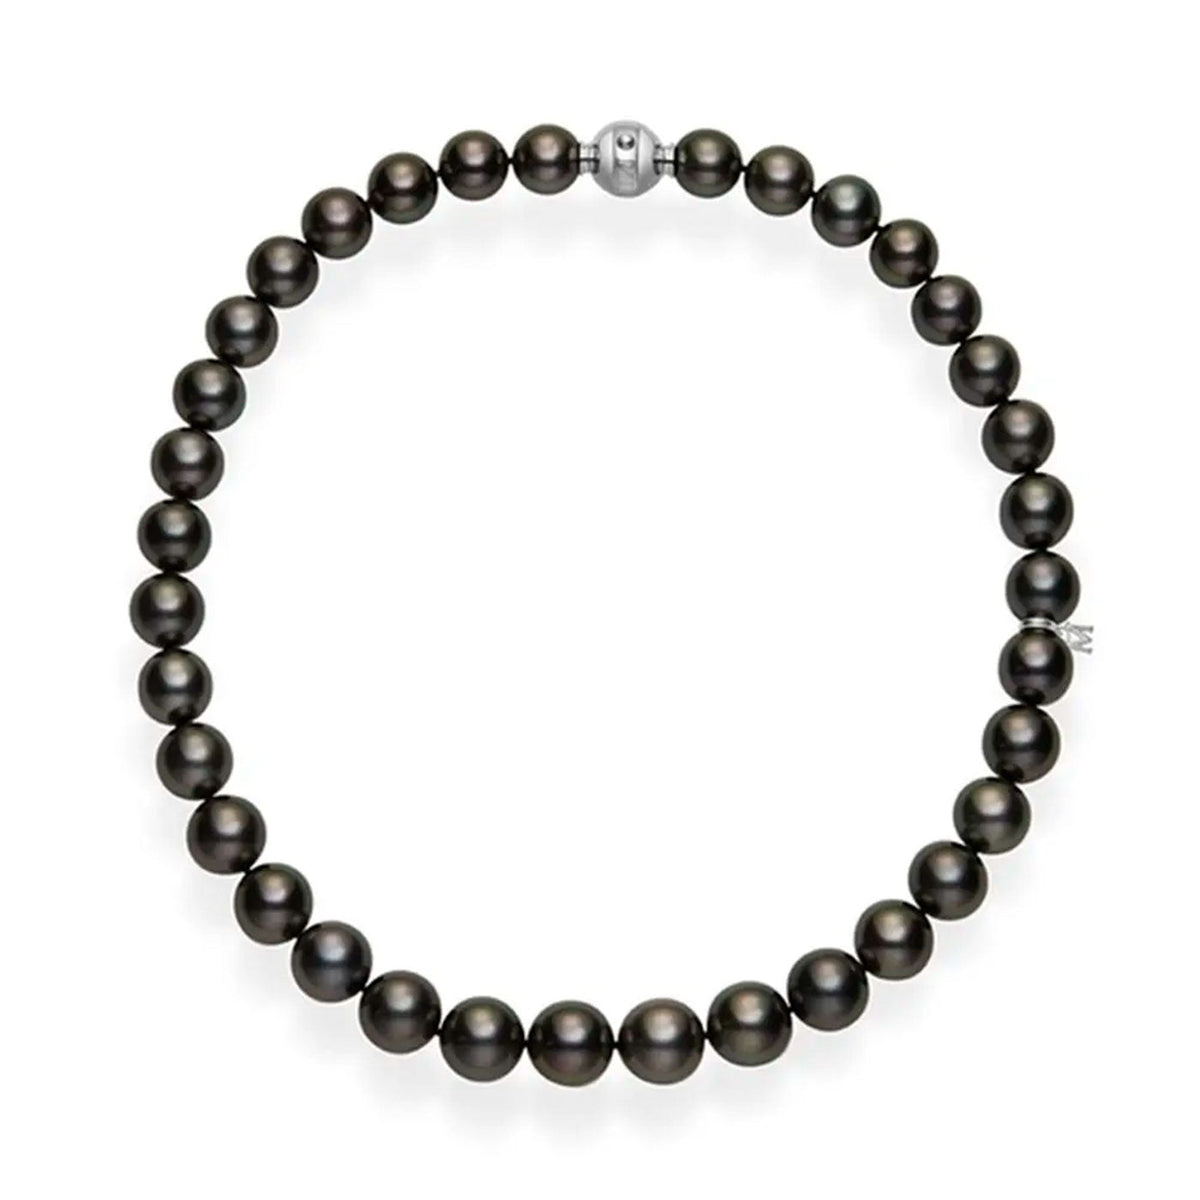 Mikimoto Black South Sea Pearl Strand Necklace with 18K White Gold Clasp |  Raffi Jewellers